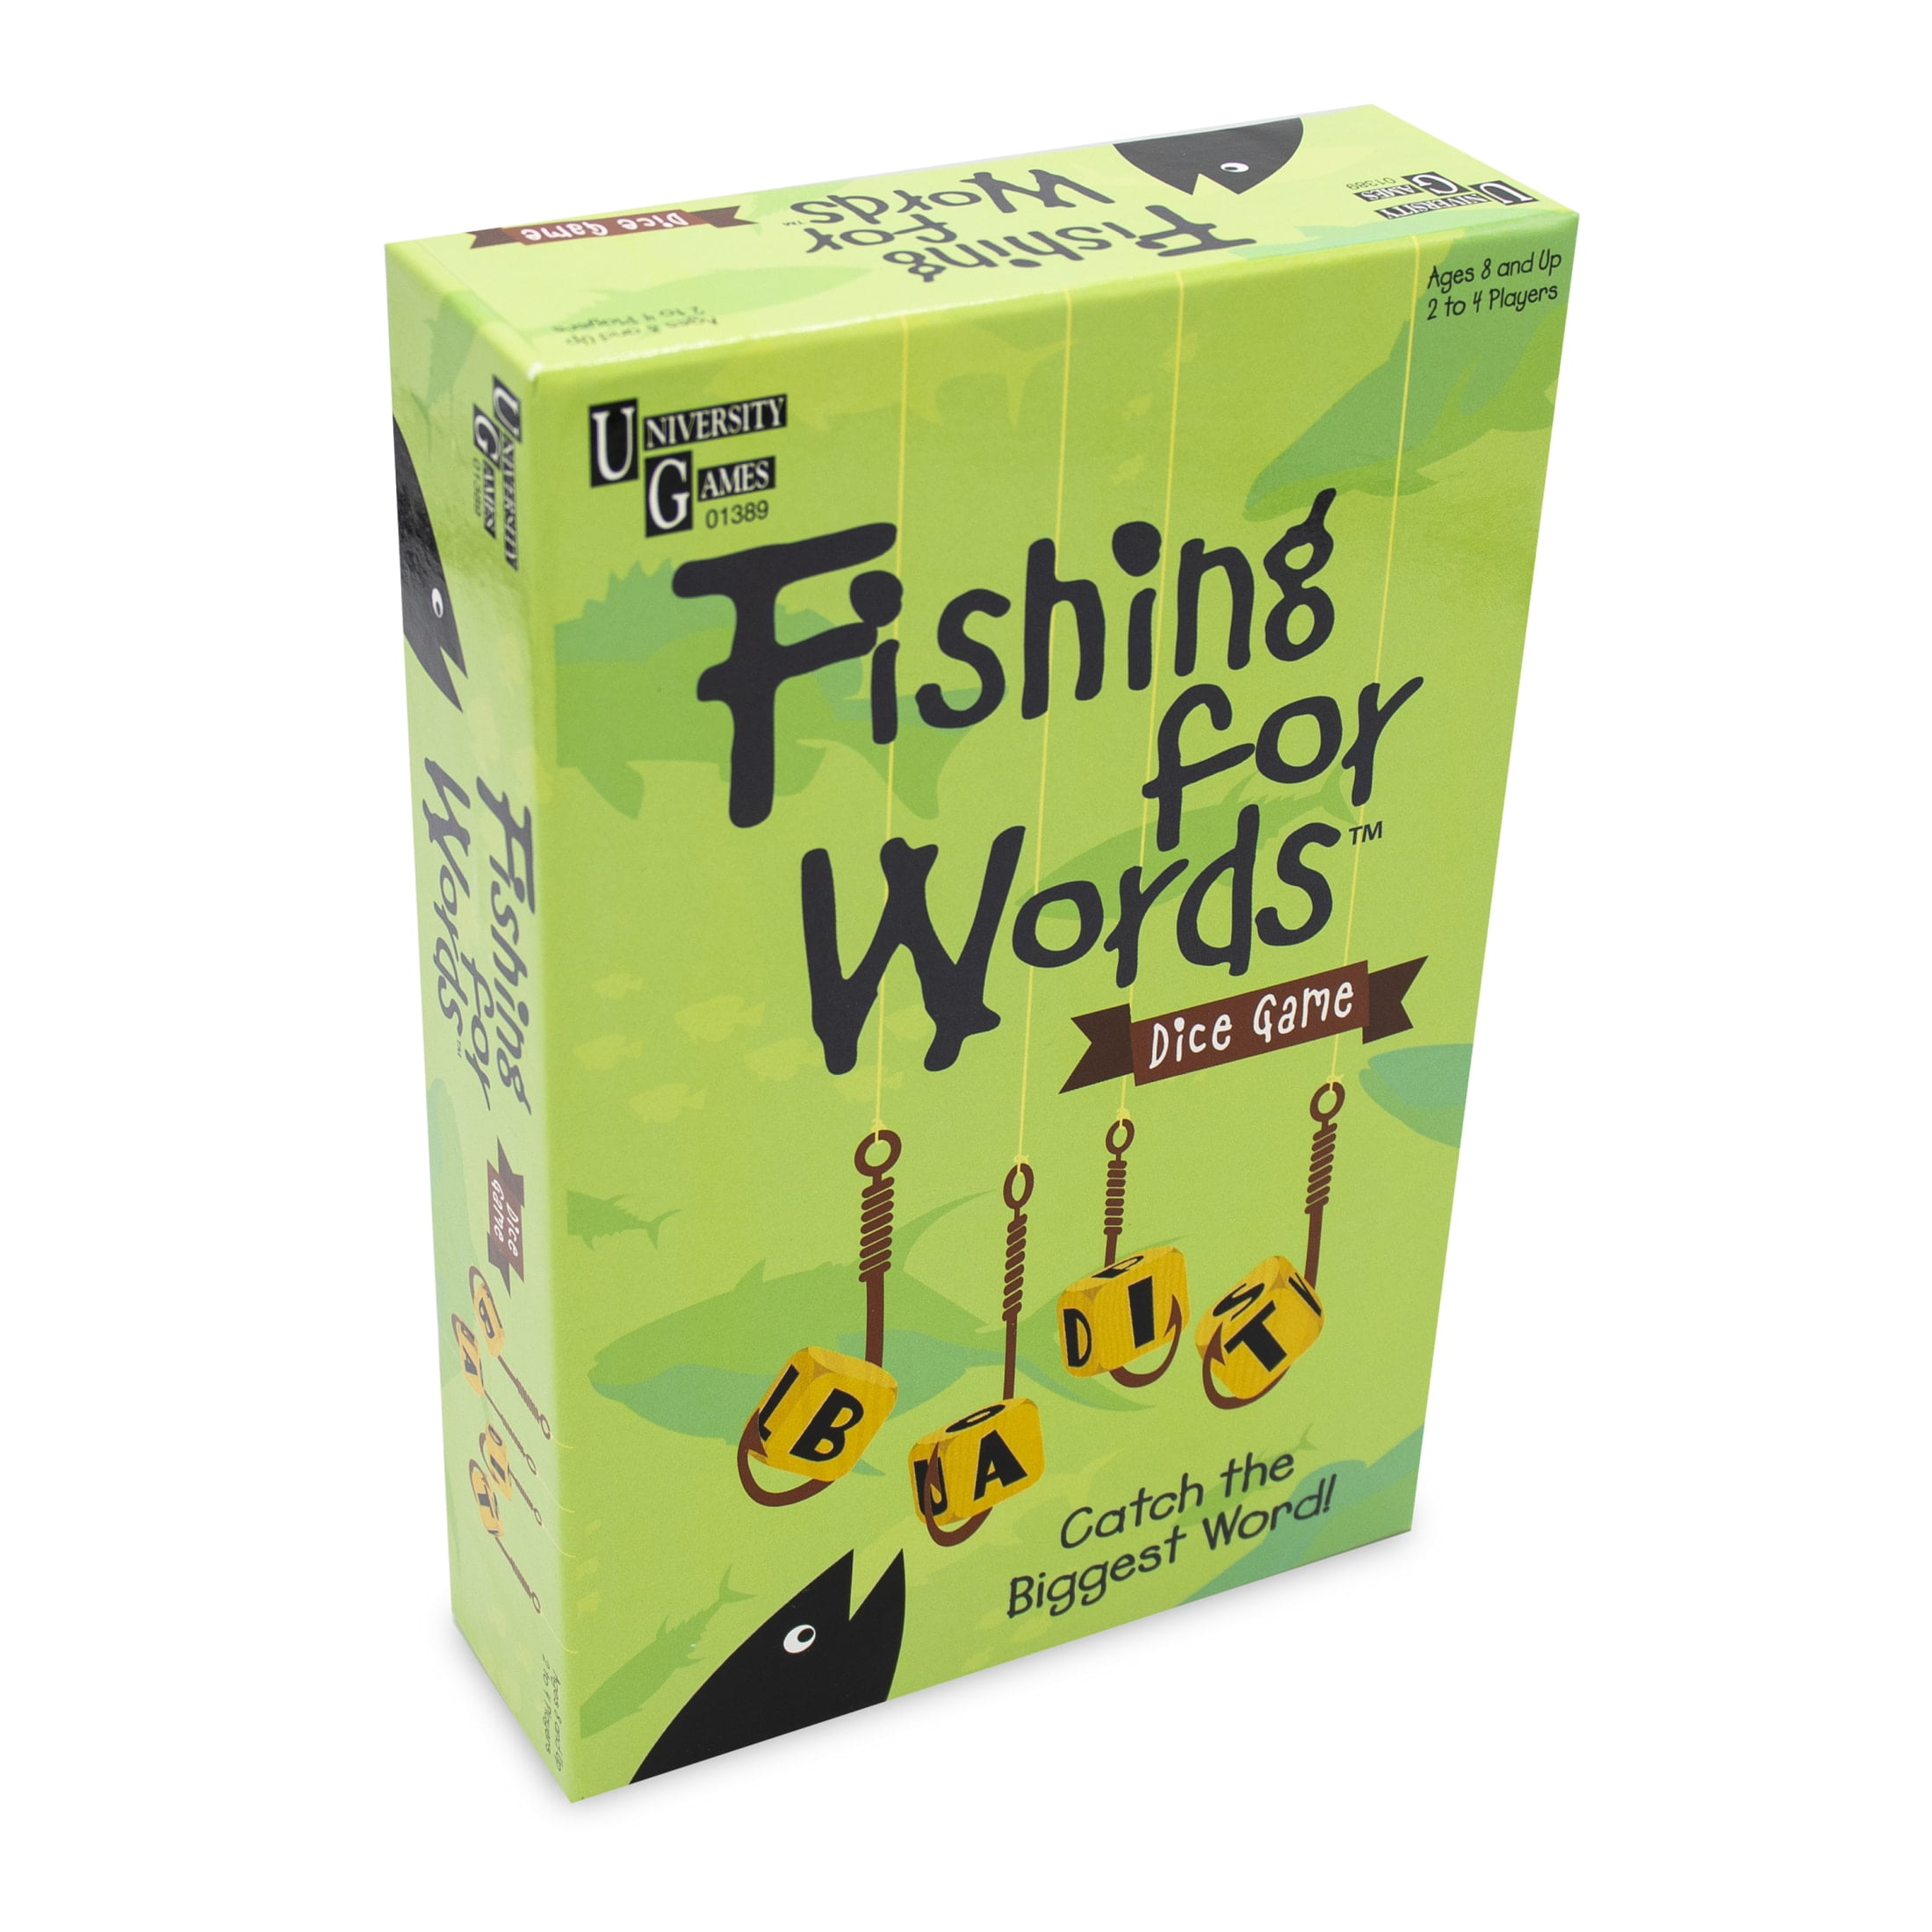 University Games Fishing for Words Dice Game for 2-4 Players Ages 8+